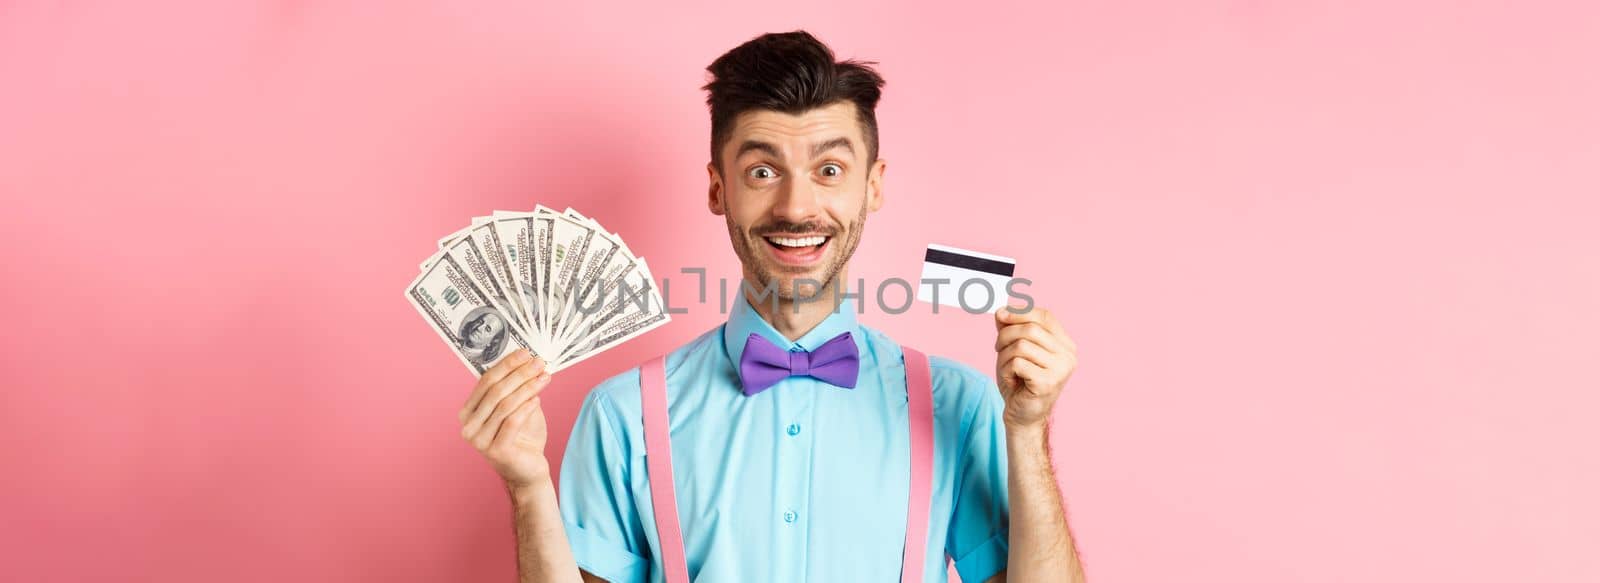 Cheerful caucasian man with moustache and bow-tie showing plastic credit card with money in dollars, smiling at camera, standing over pink background by Benzoix